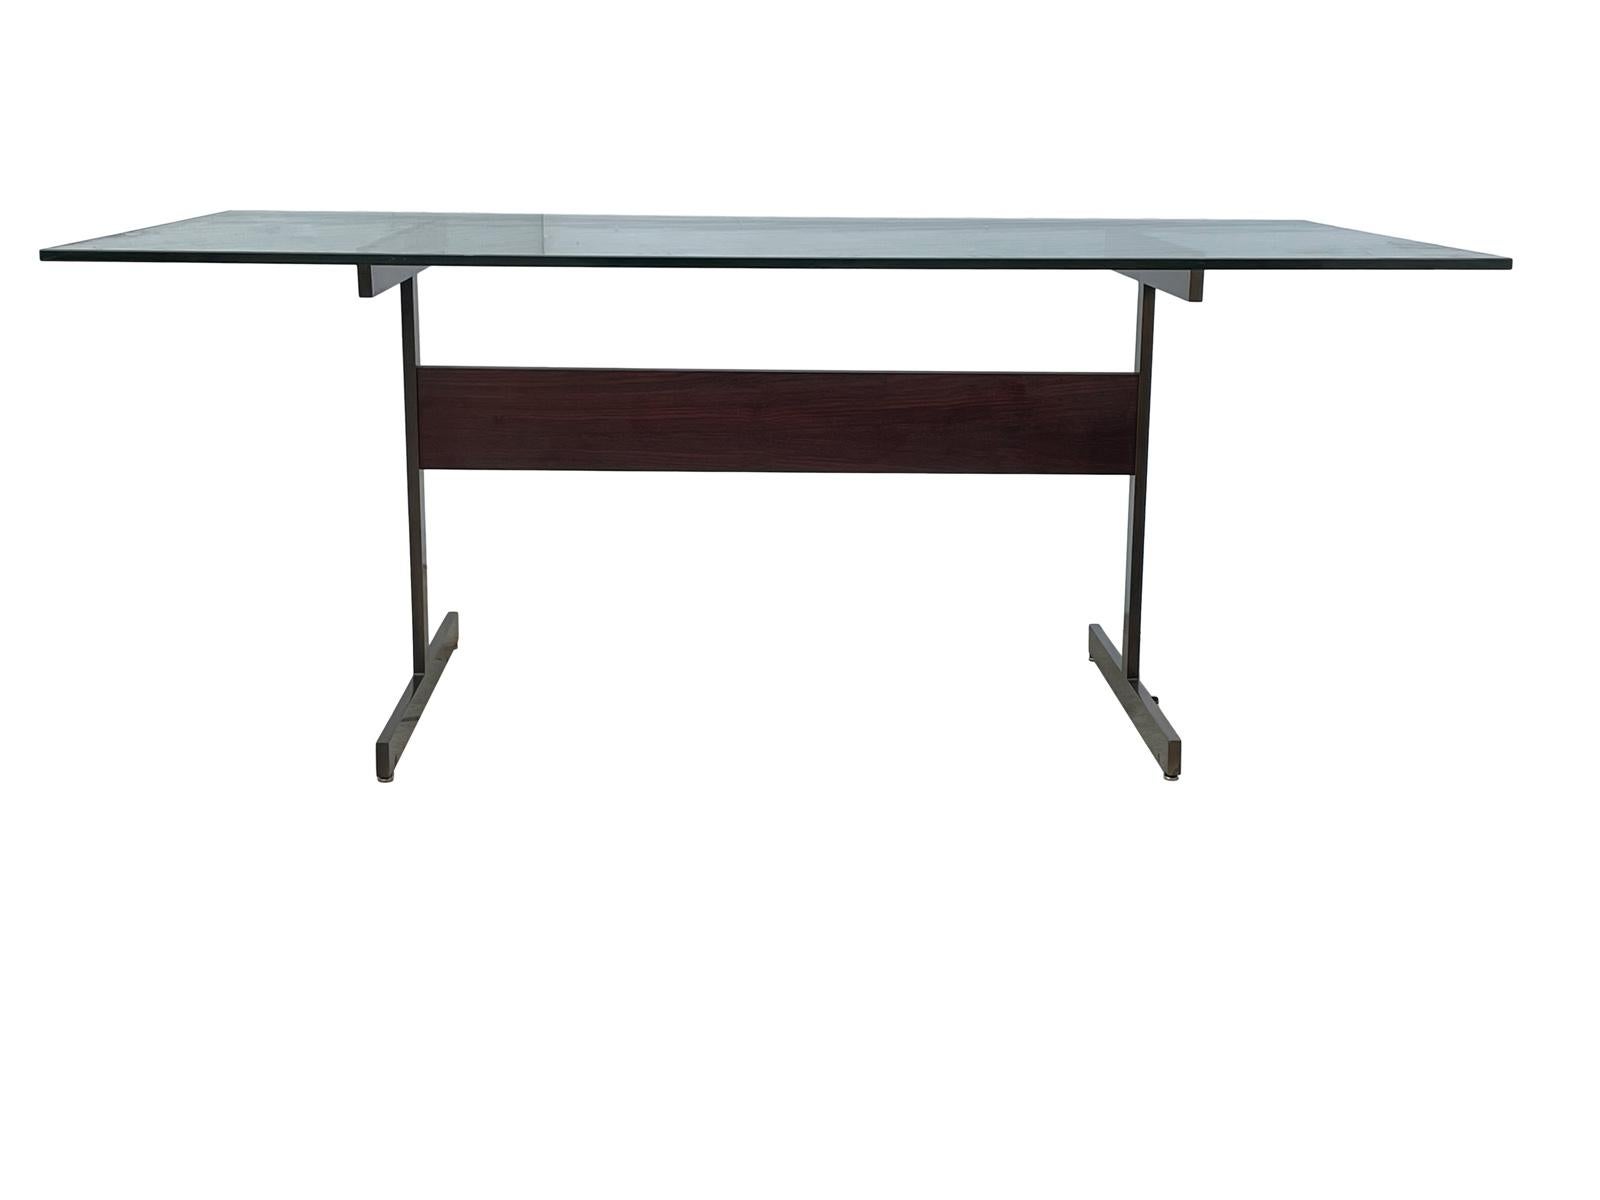 Clean rectangular glass top with rosewood & bronze colored metal